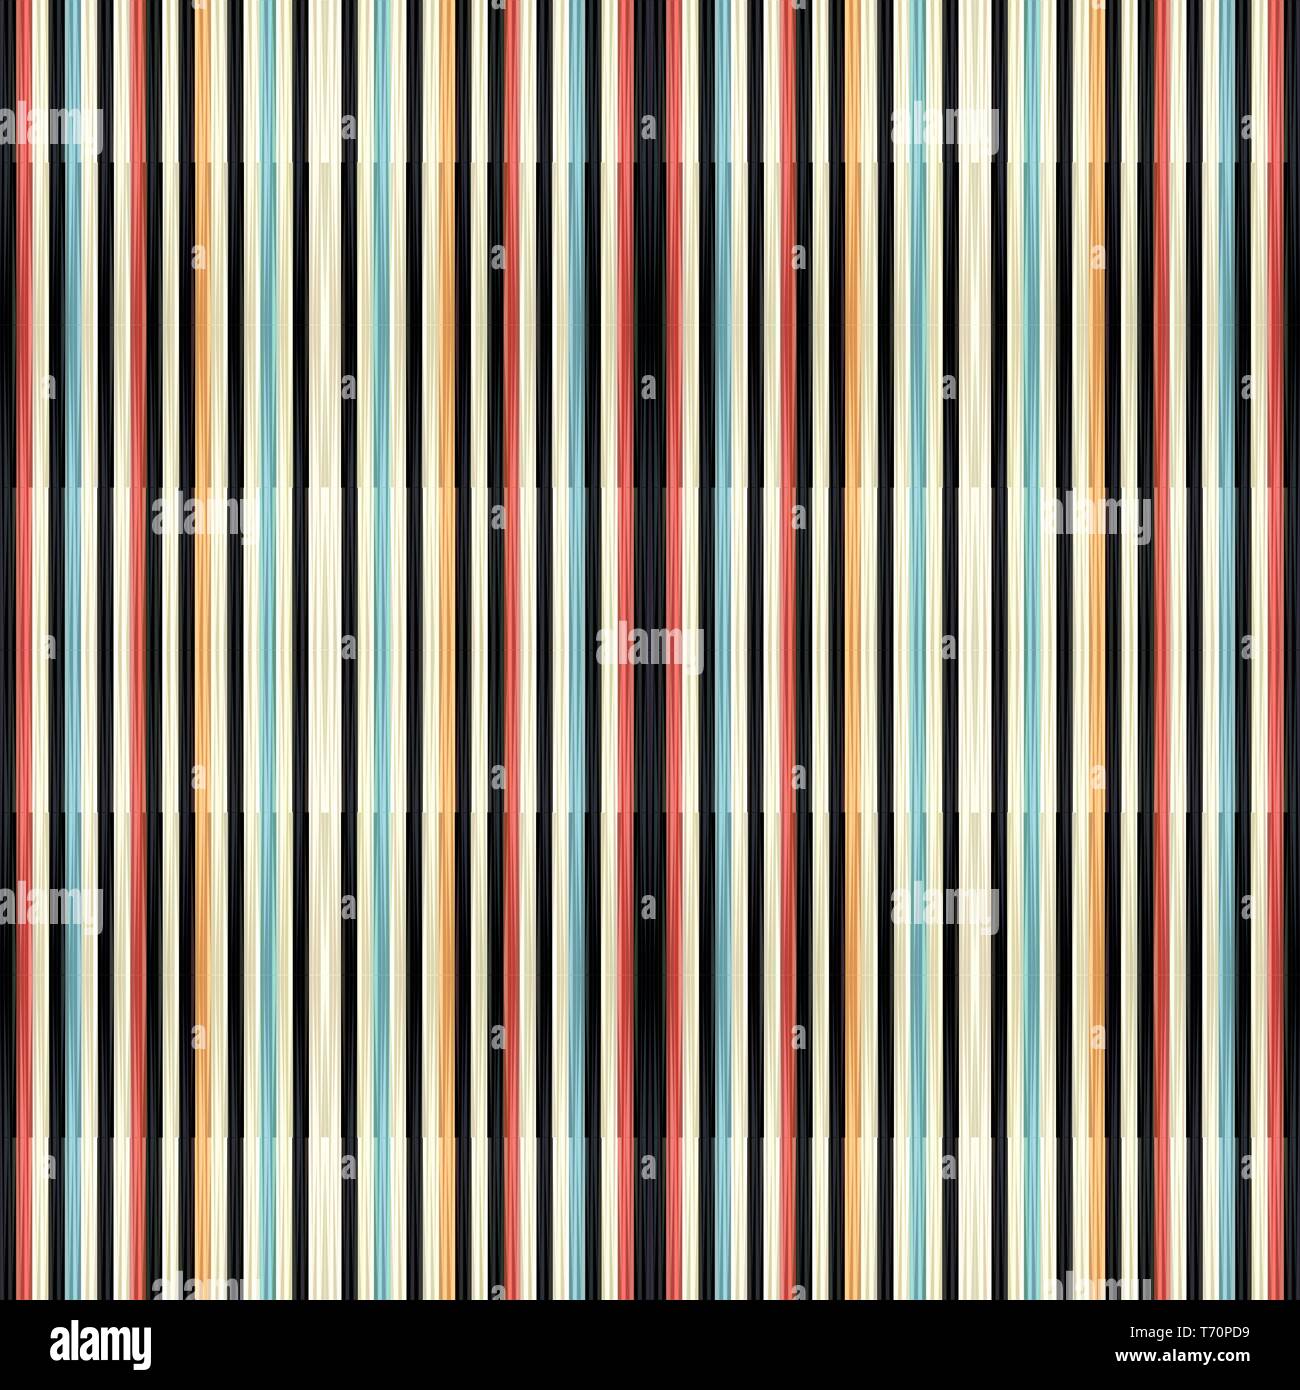 Black Light Gray And Sienna Vertical Stripes Graphic Seamless Pattern Can Be Used For Wallpaper Poster Fasion Garment Or Textile Texture Design Stock Photo Alamy